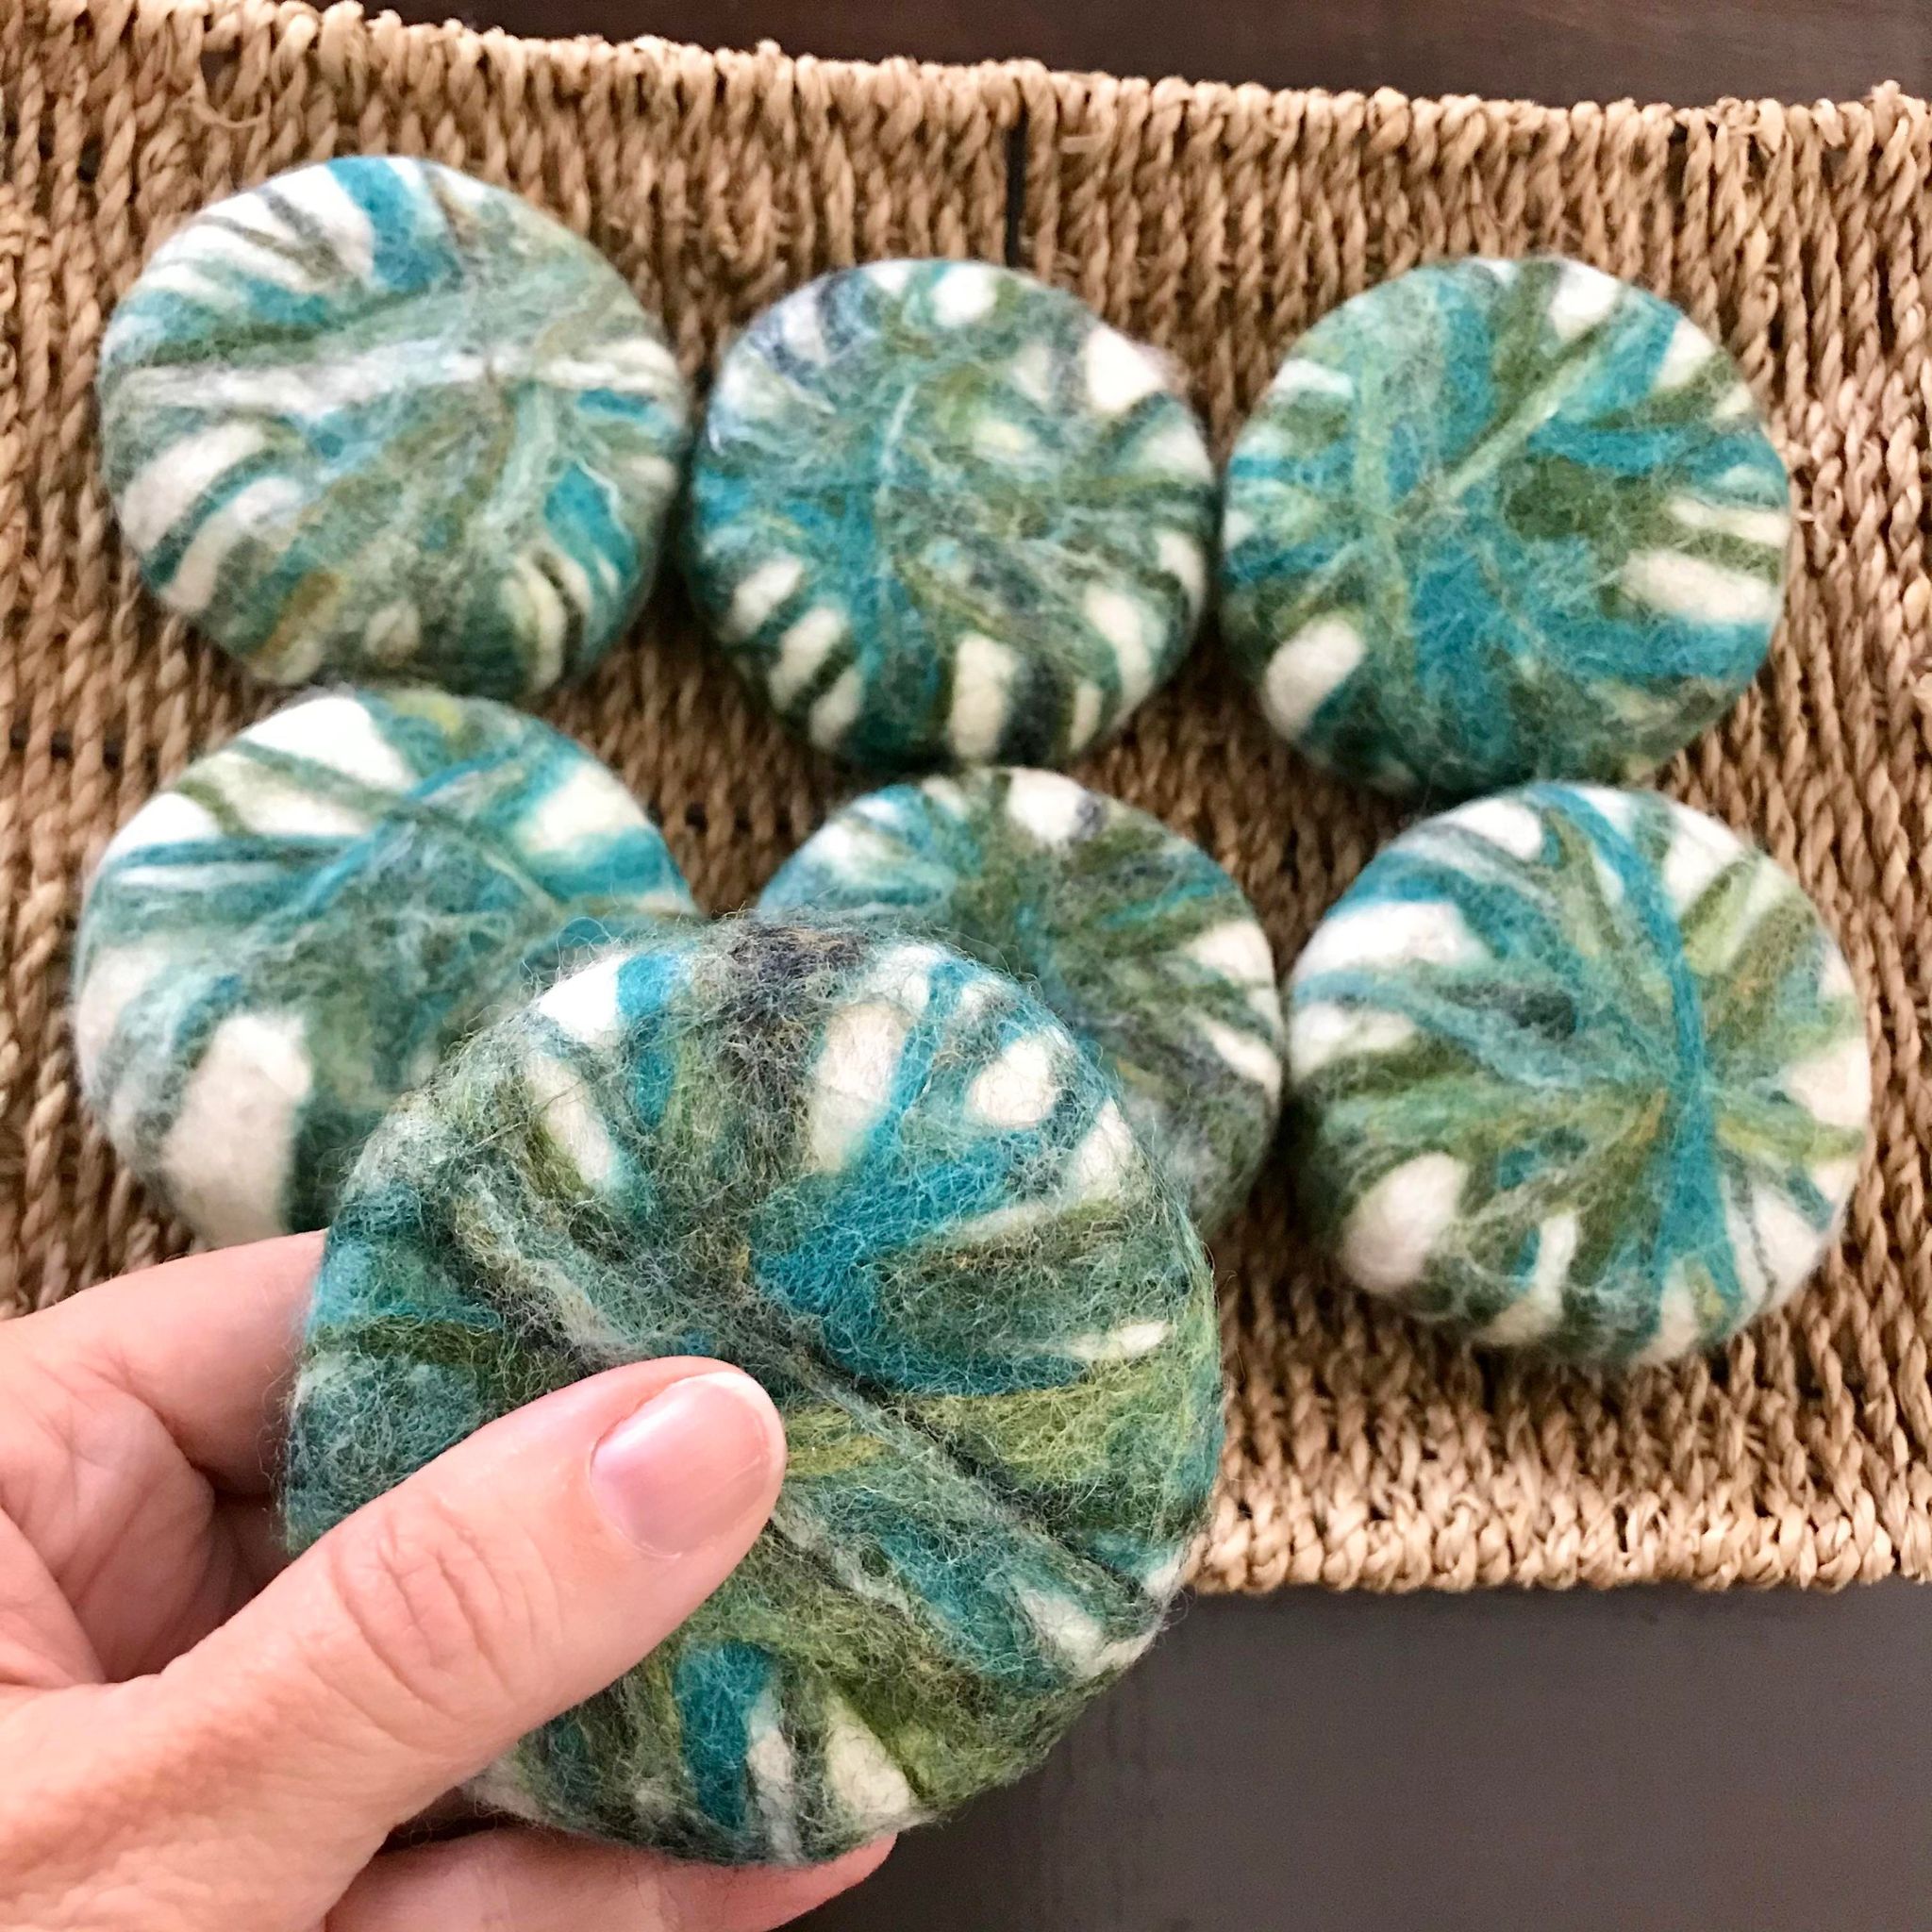 Round Simply Natural Canada cedar fir essential oil natural soap made in Canada with local apple wine and hand felted in shades of green and white